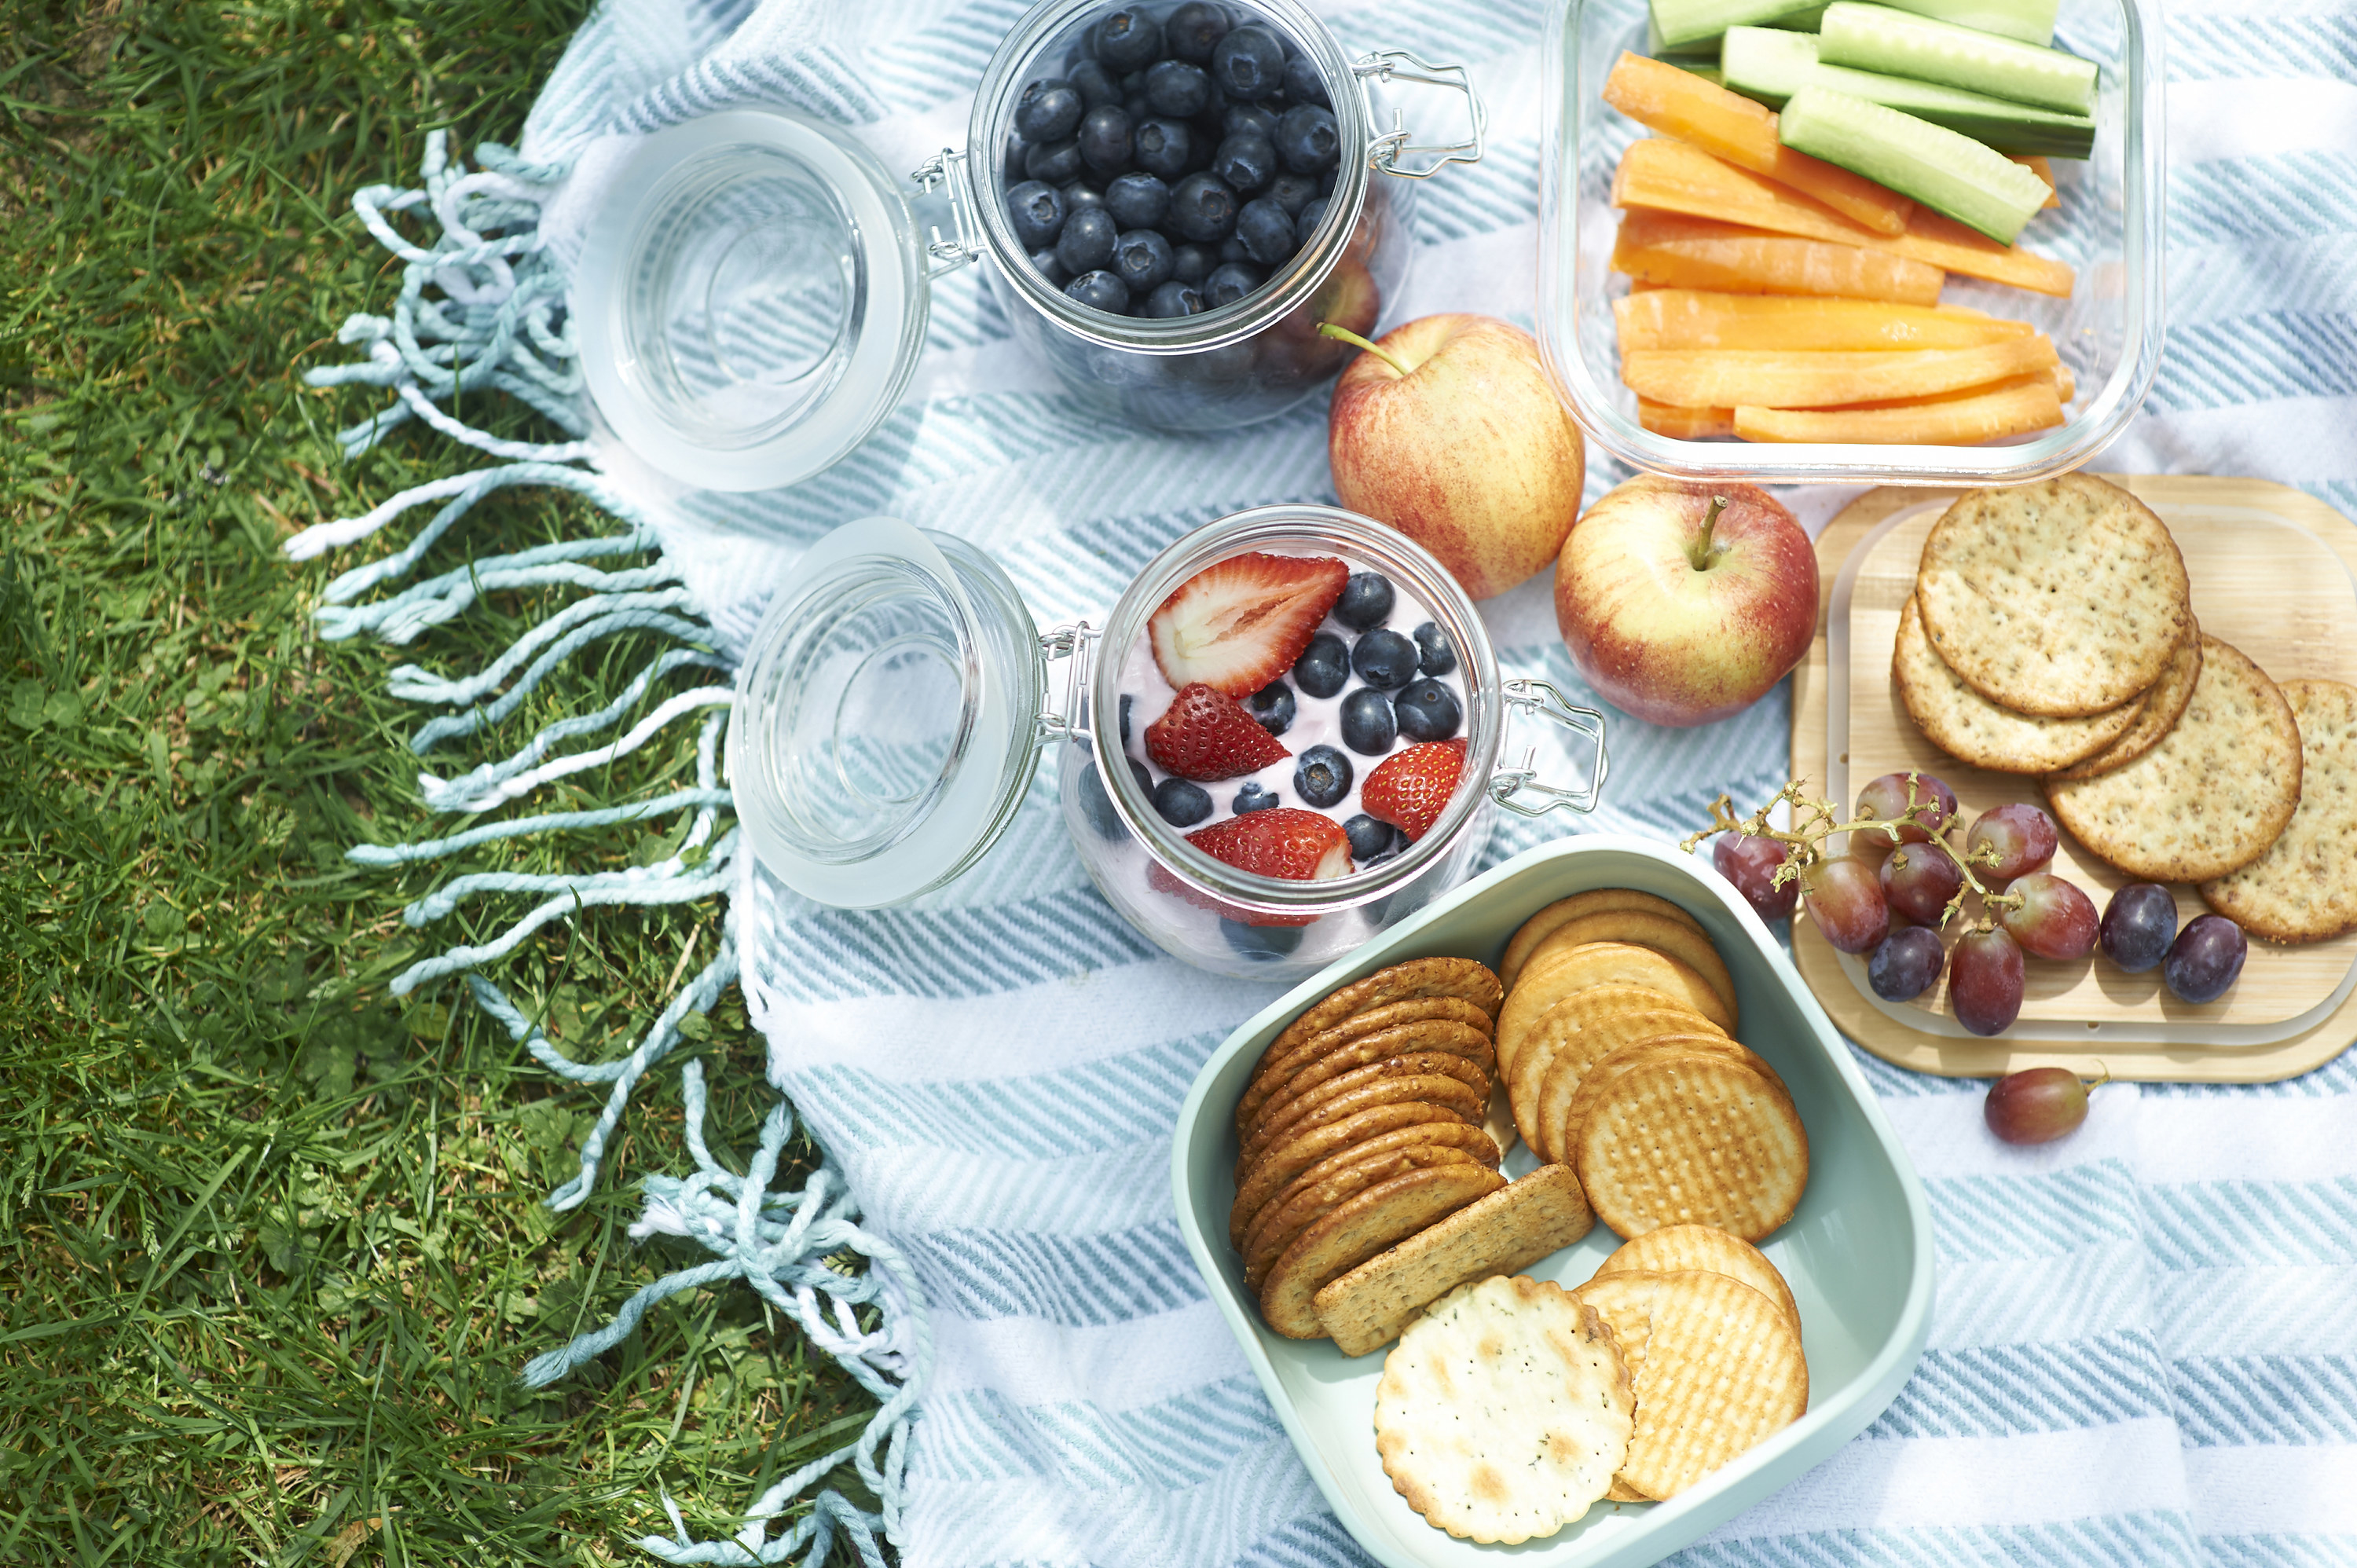 A picnic with an assortment of food